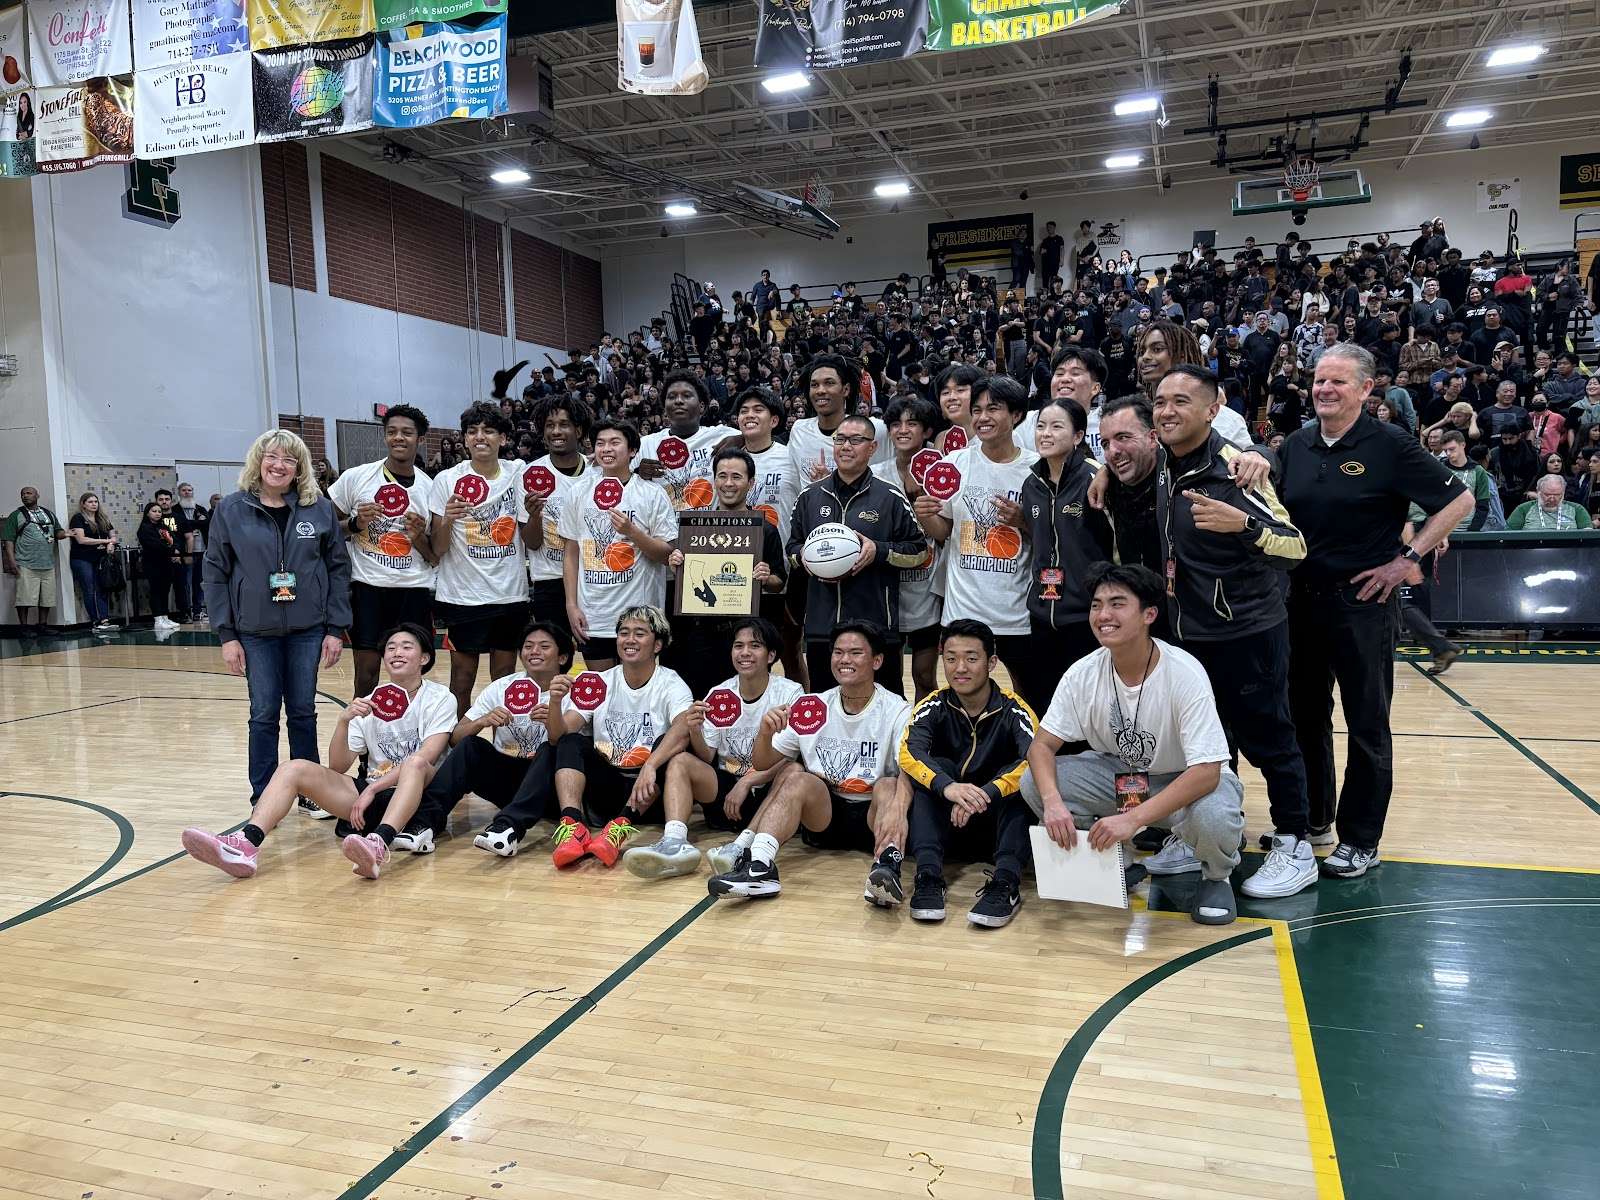 Cerritos High School Boys Varsity Basketball Team Wins Division CIF Championship with a 60-51 Victory